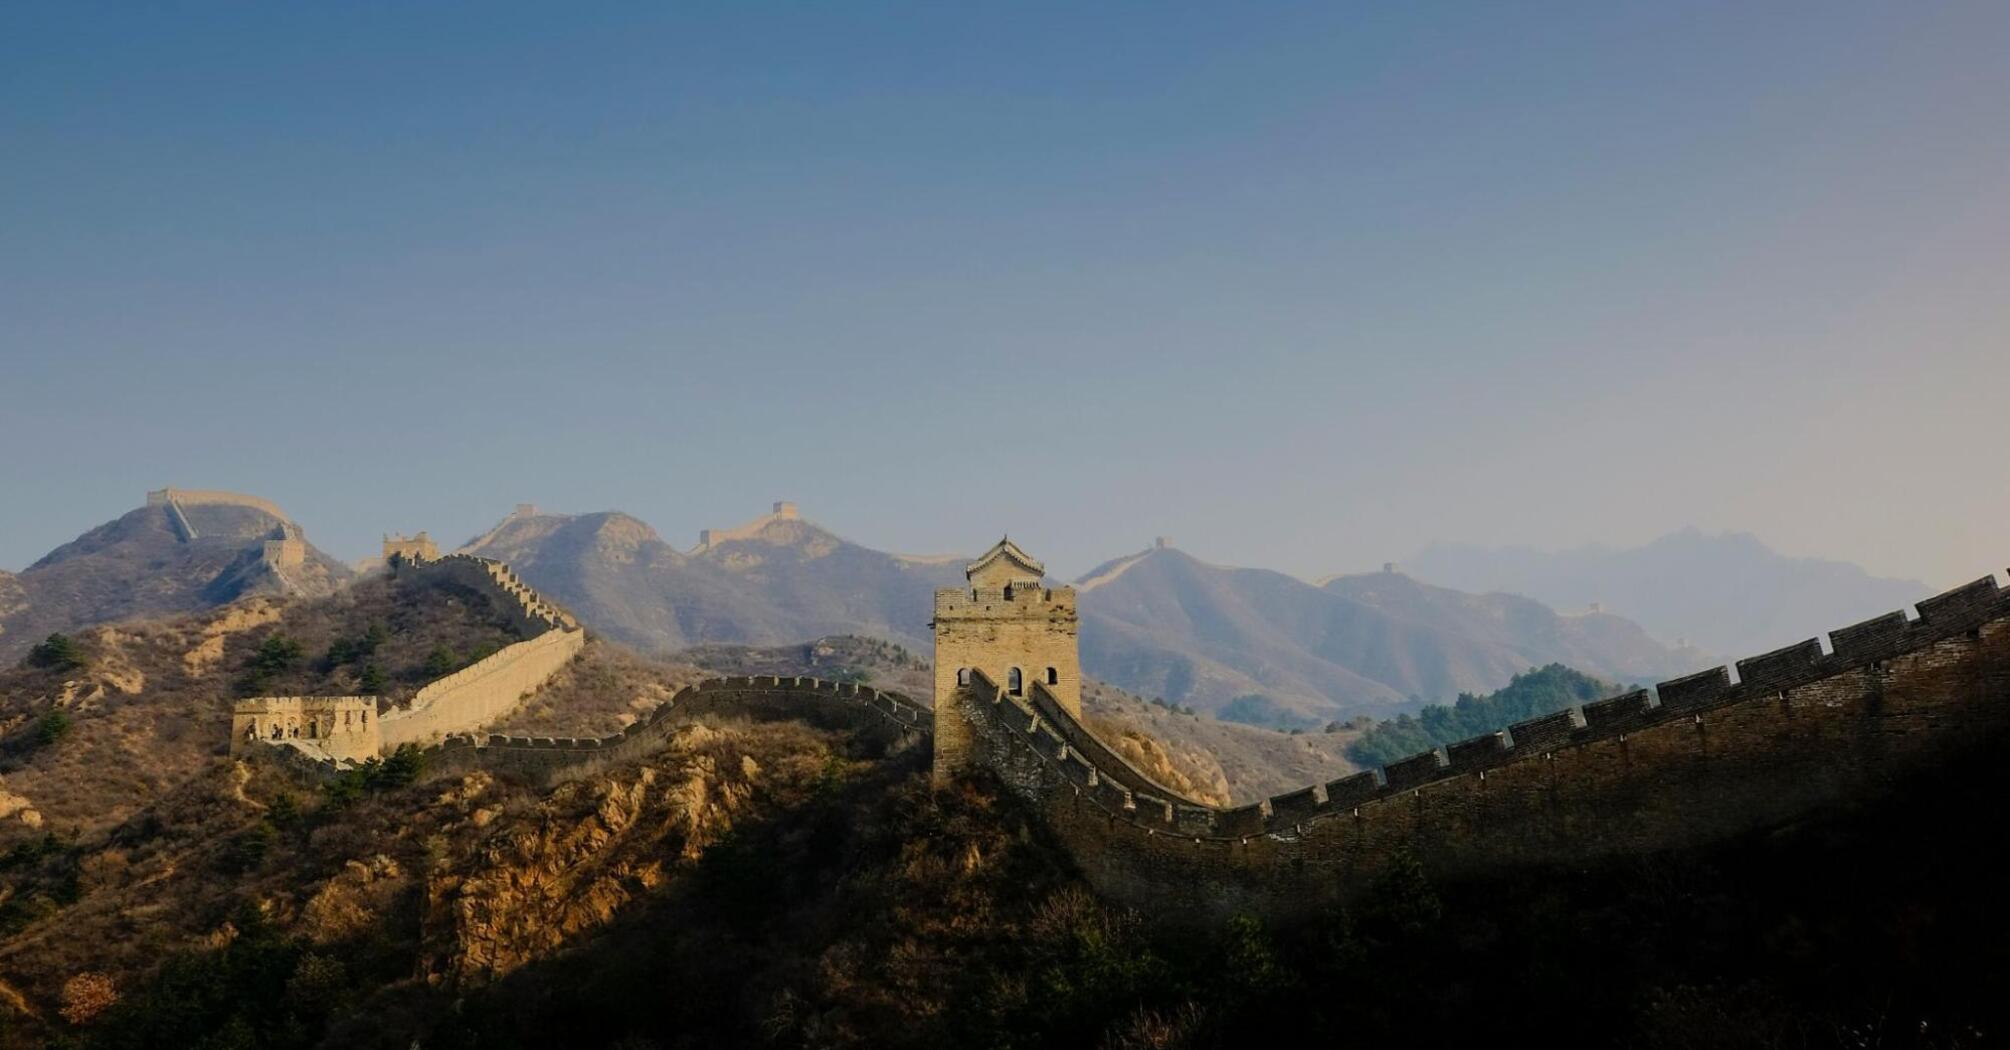 Sunset view of the Great Wall in China